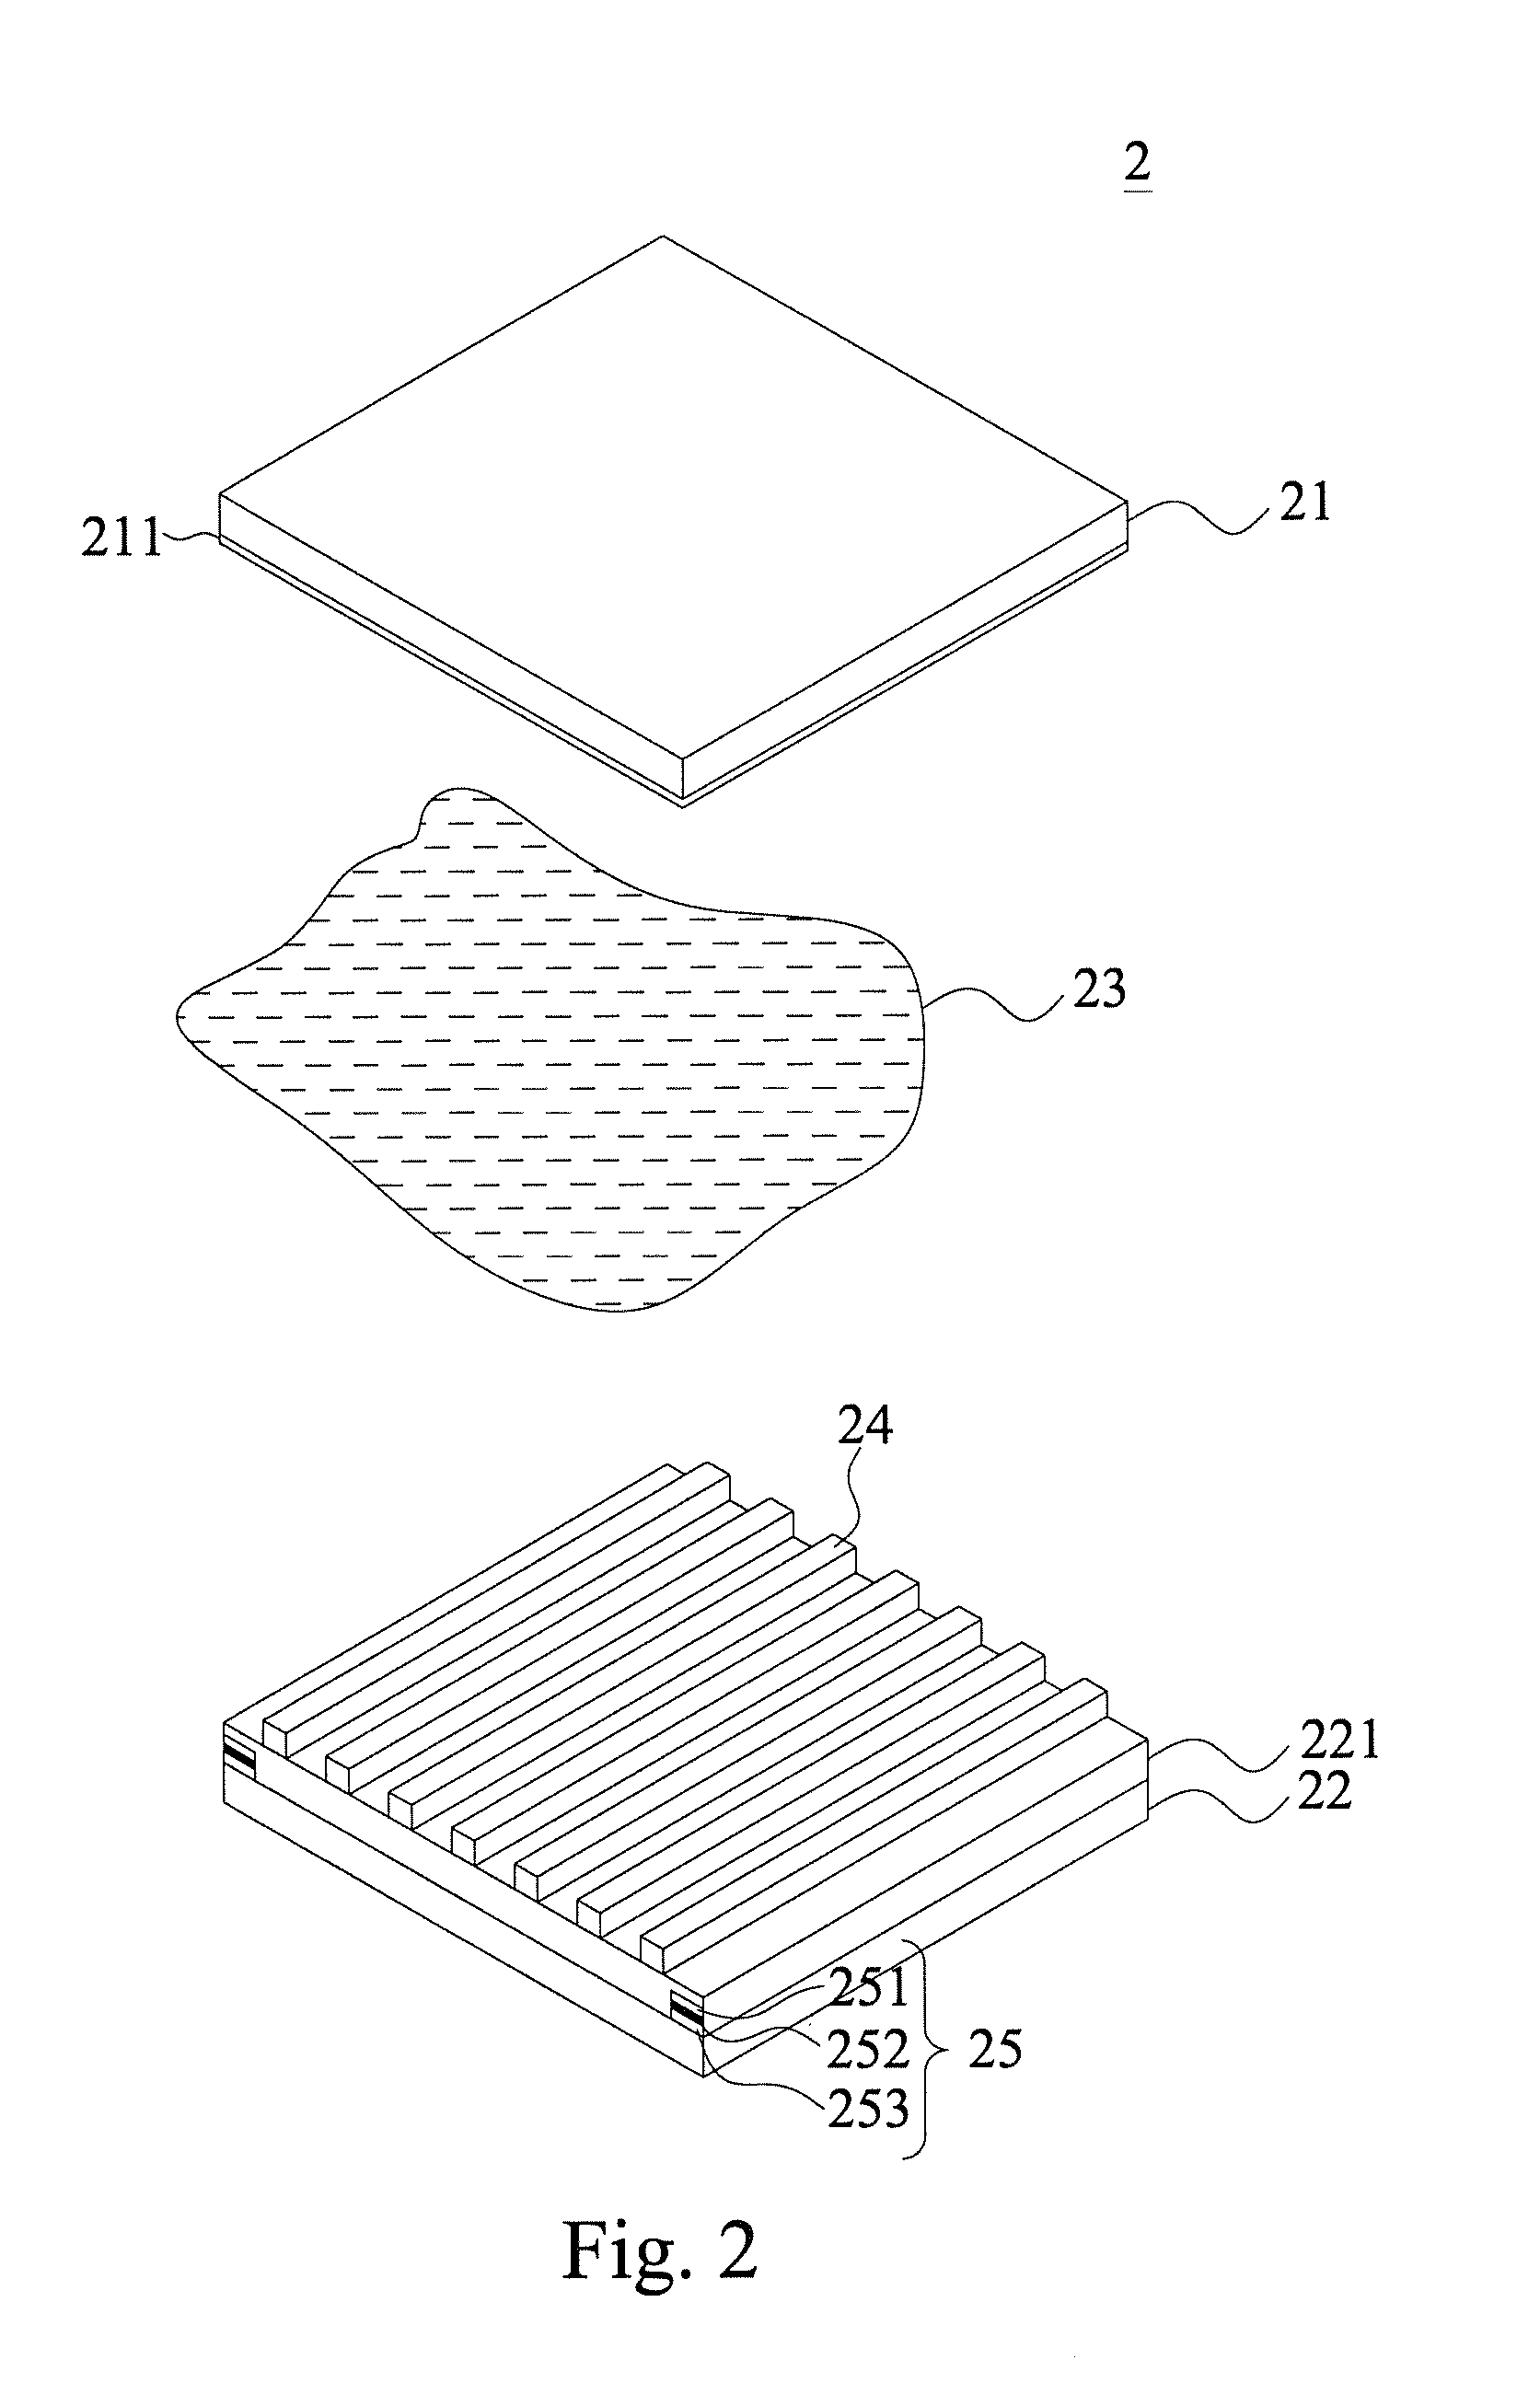 Grating structure of 2d/3d switching display device